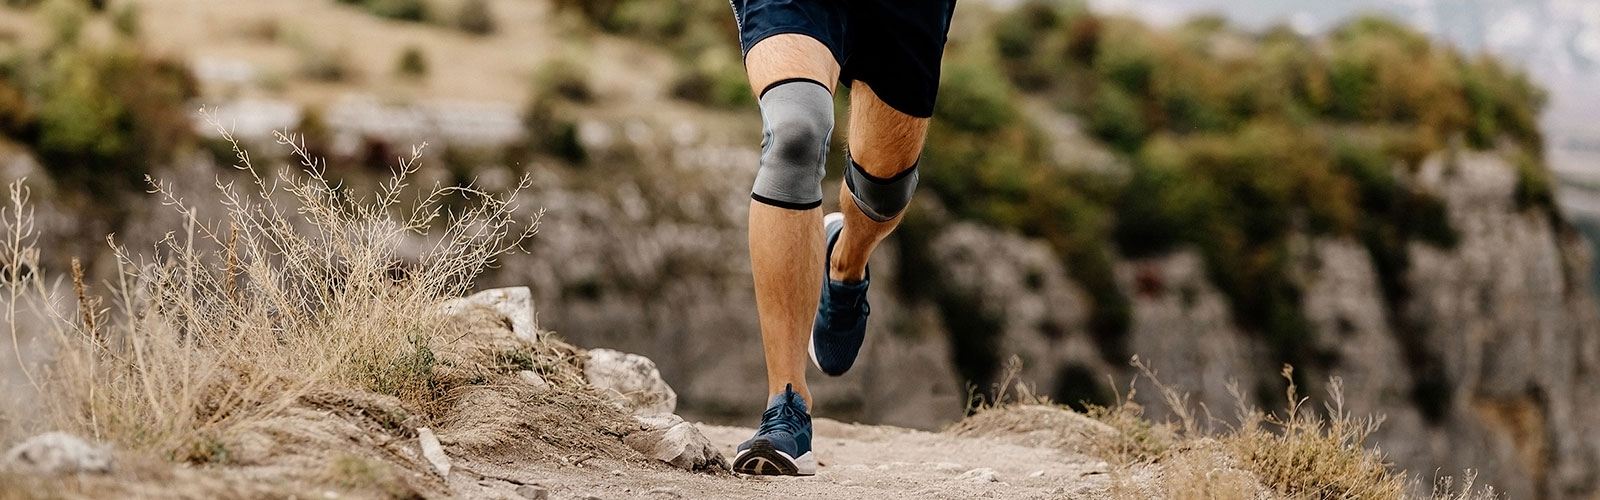 Preventing overuse injuries in runners - Inspire Fitness for Wellbeing ...